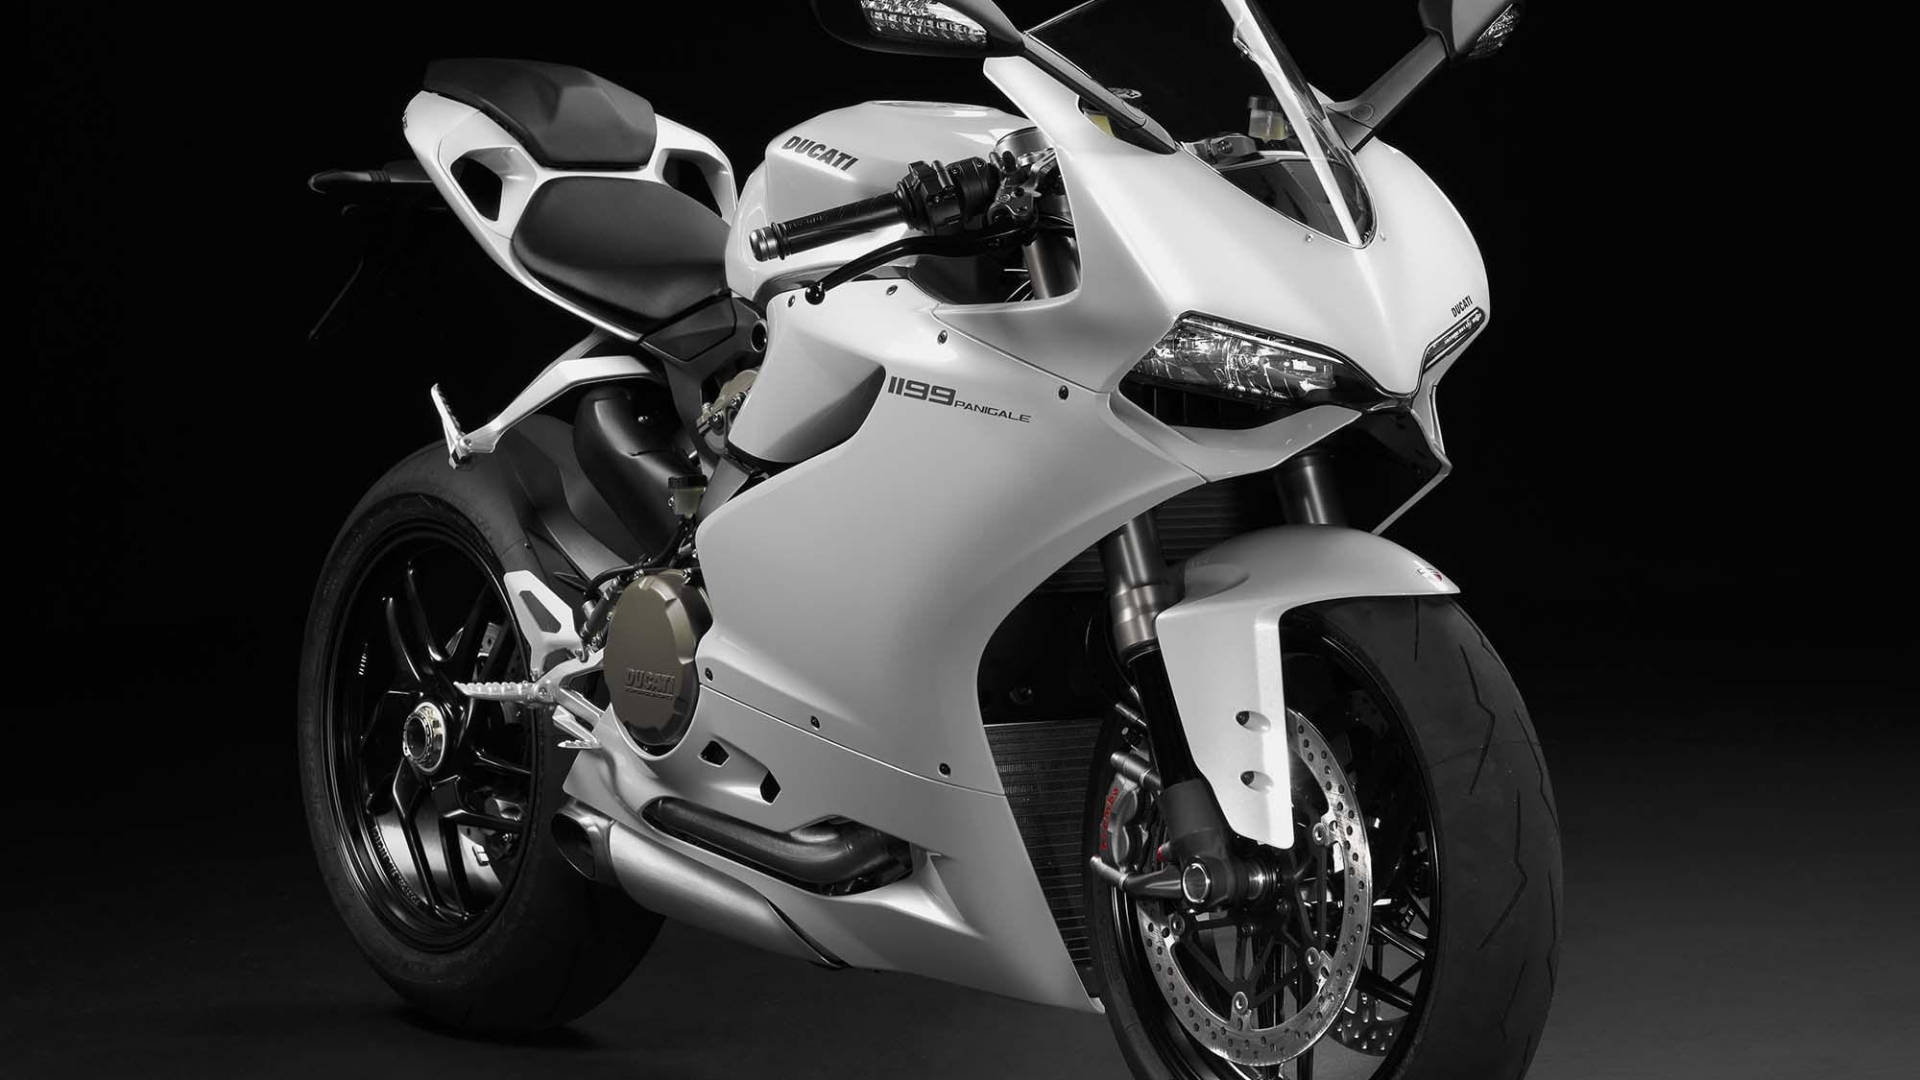 Enjoy The Speed And Style Of The Ducati 1199 Panigale In Arctic White Background